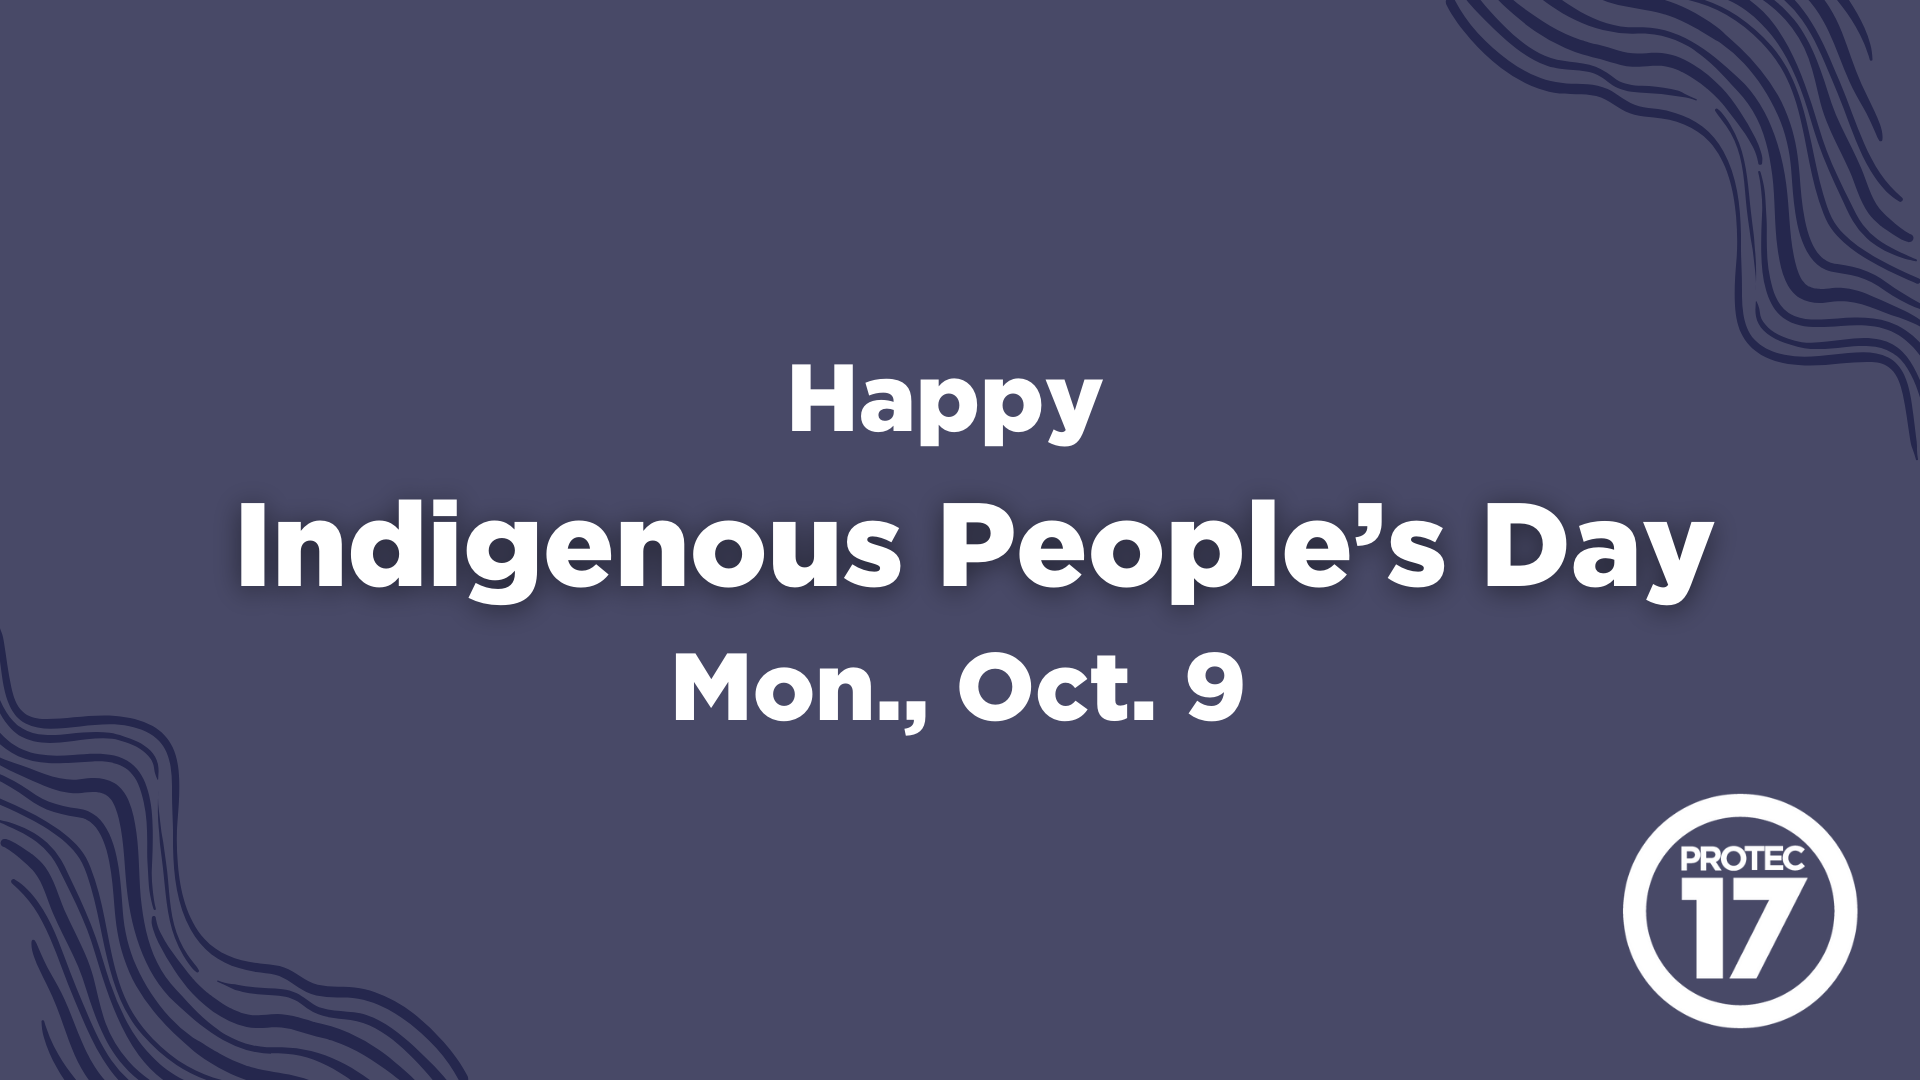 Text reads, "Happy Indigenous People's Day Mon., Oct. 9" There are wood line type designs in the top right and bottom left corners. The PROTEC17 logo is in the bottom right corner.